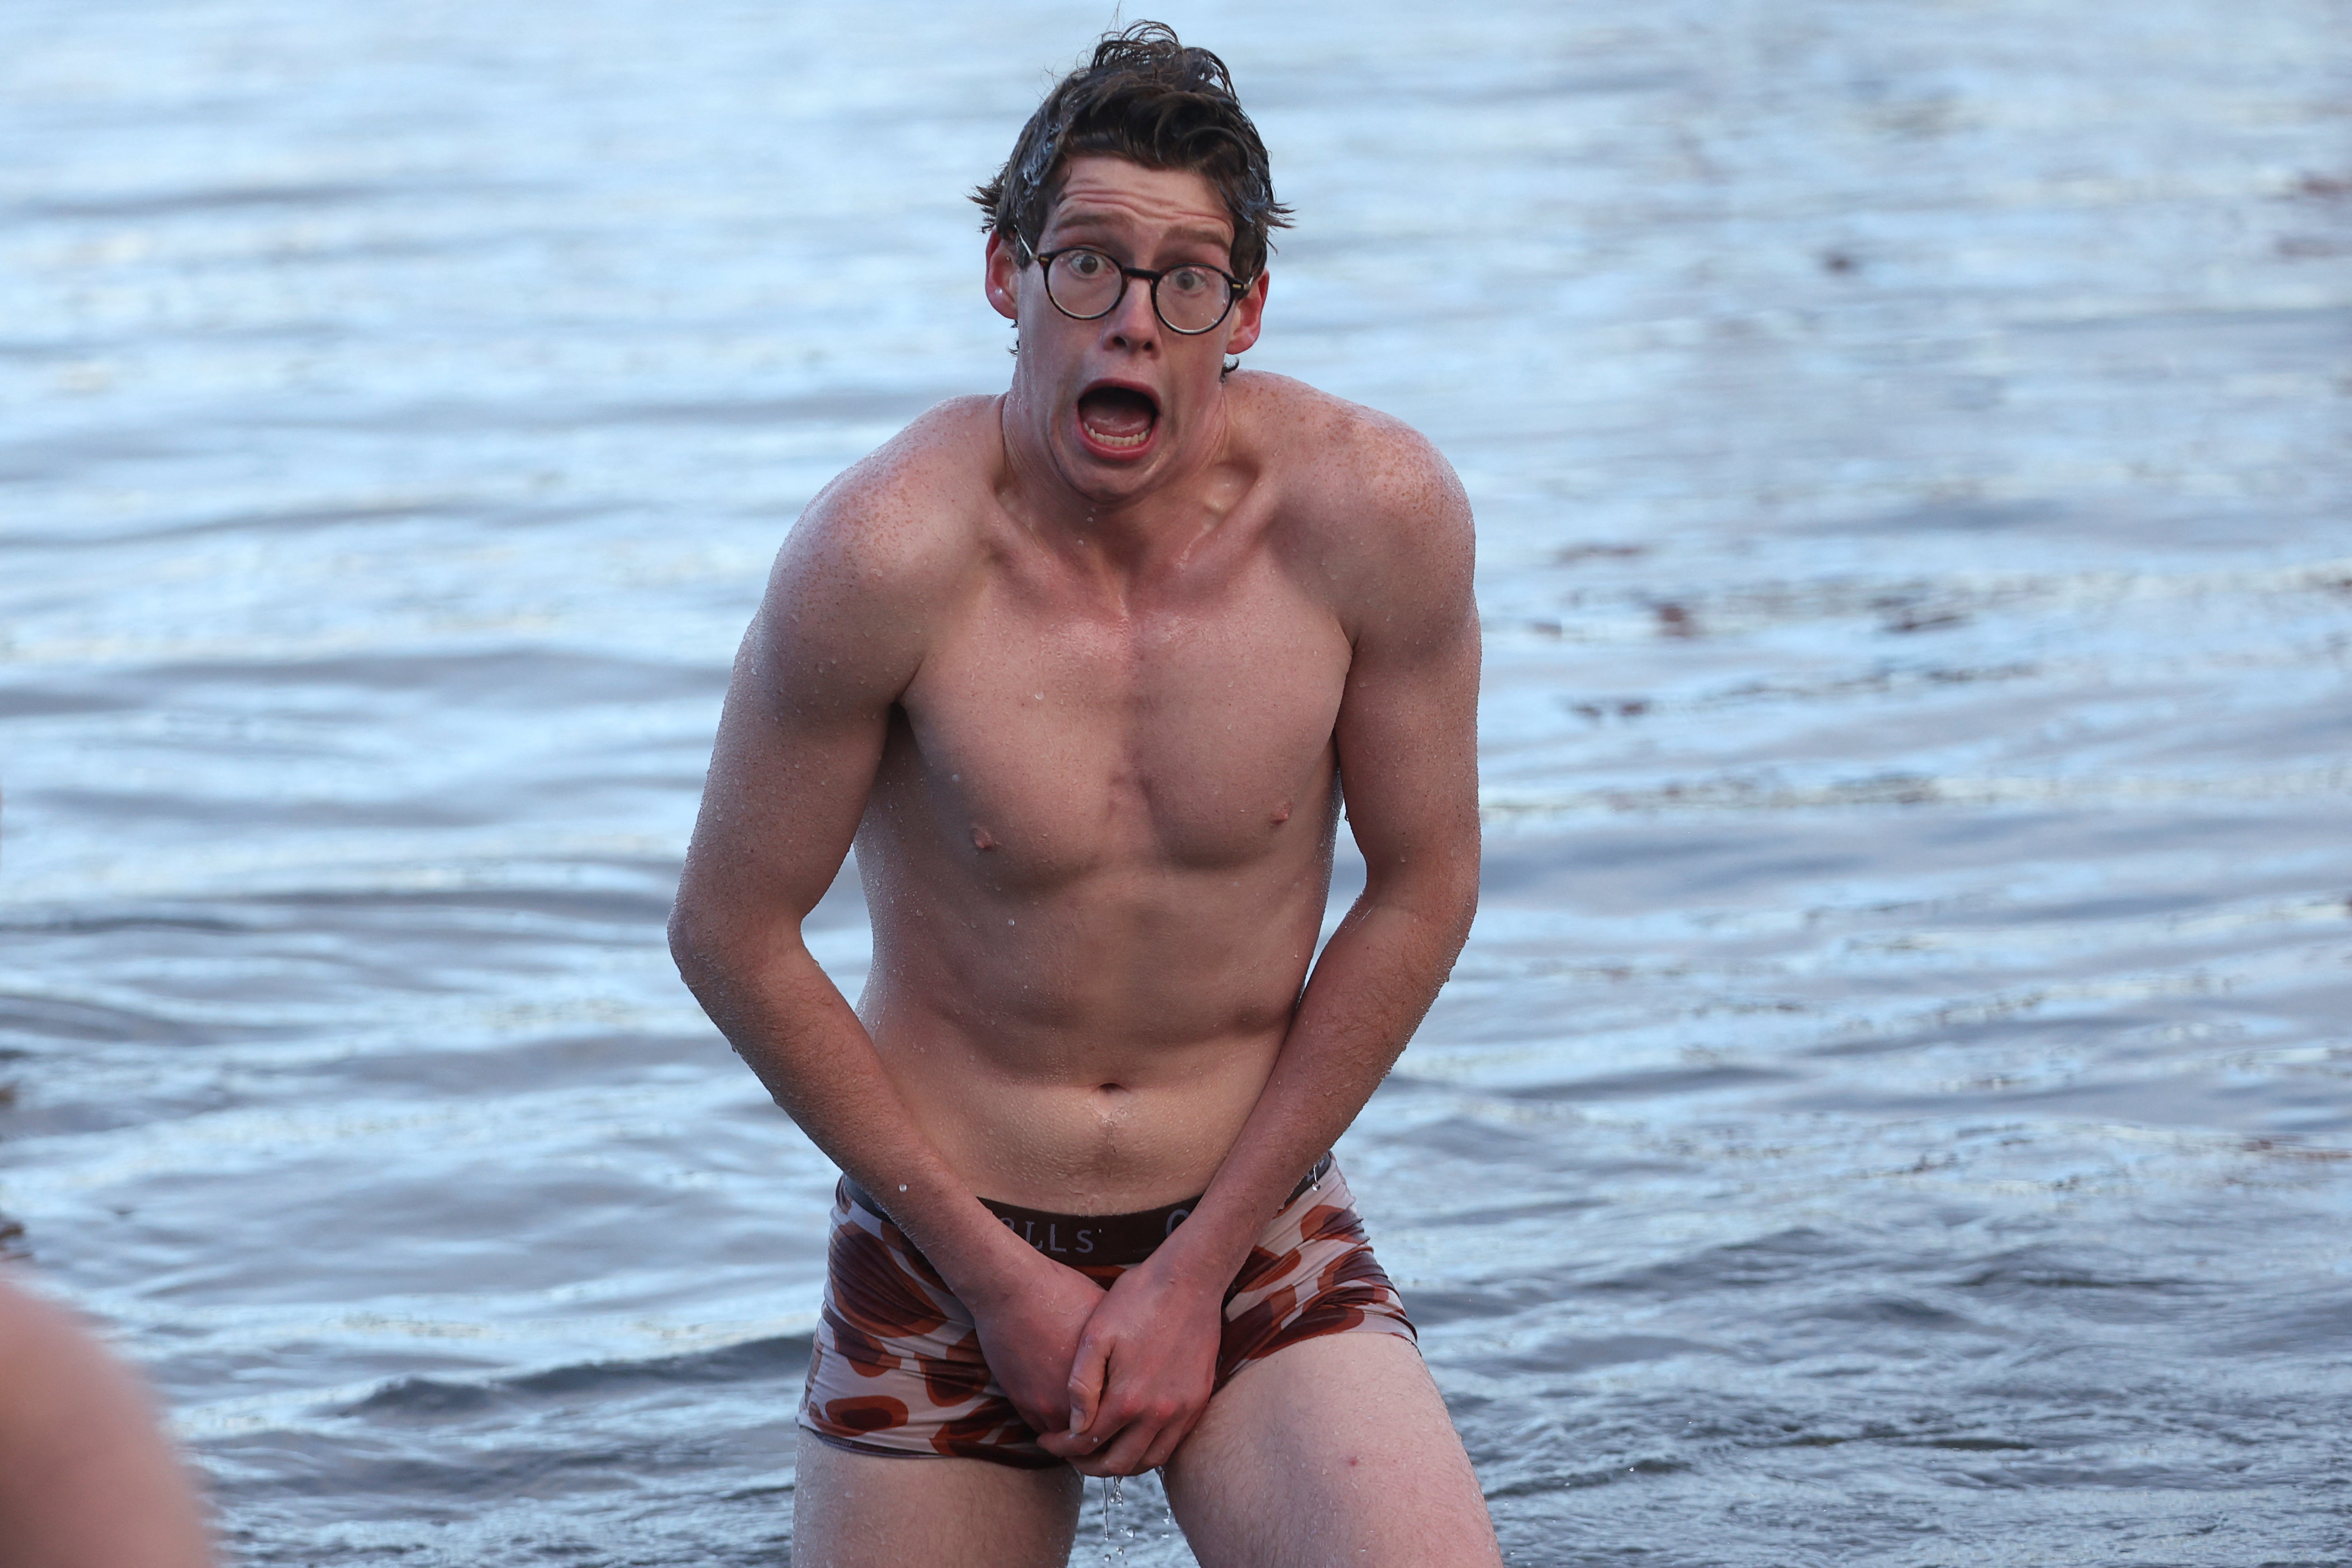 A reveller reacts as they participate in the loony dook at South Queensferry